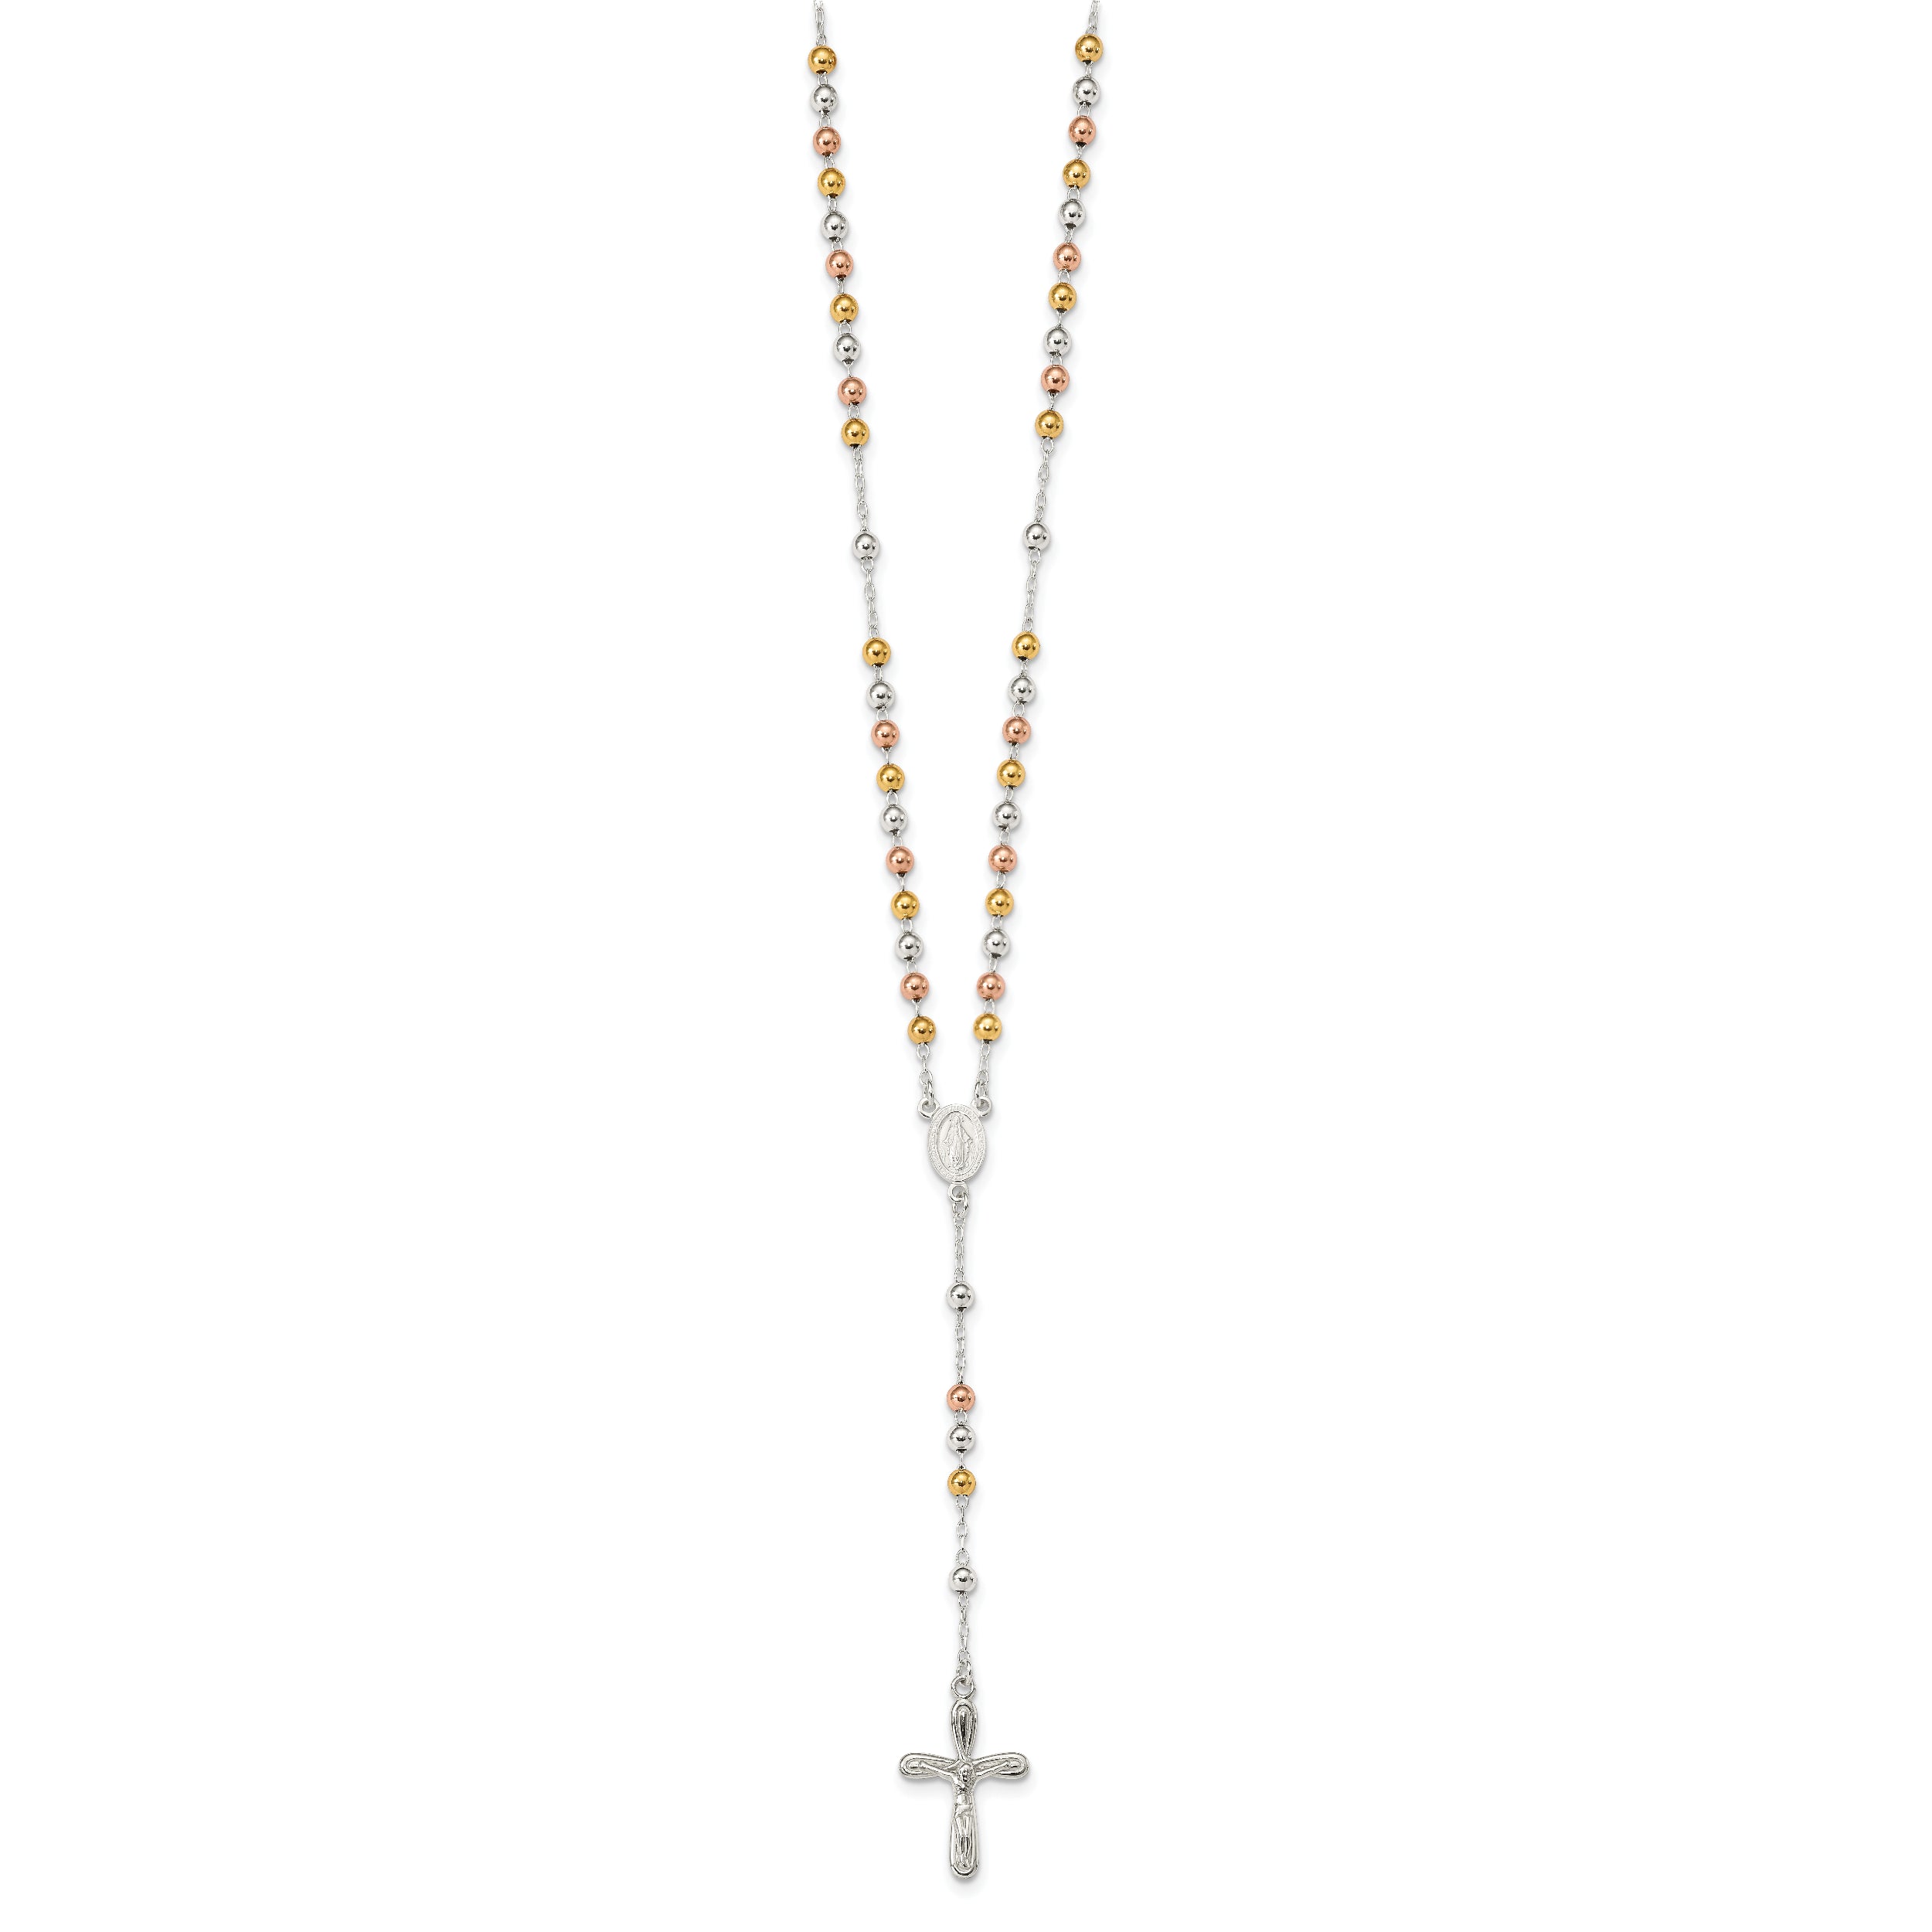 Sterling Silver Polished White Rose and Yellow Bead Rosary 18 inch Necklace